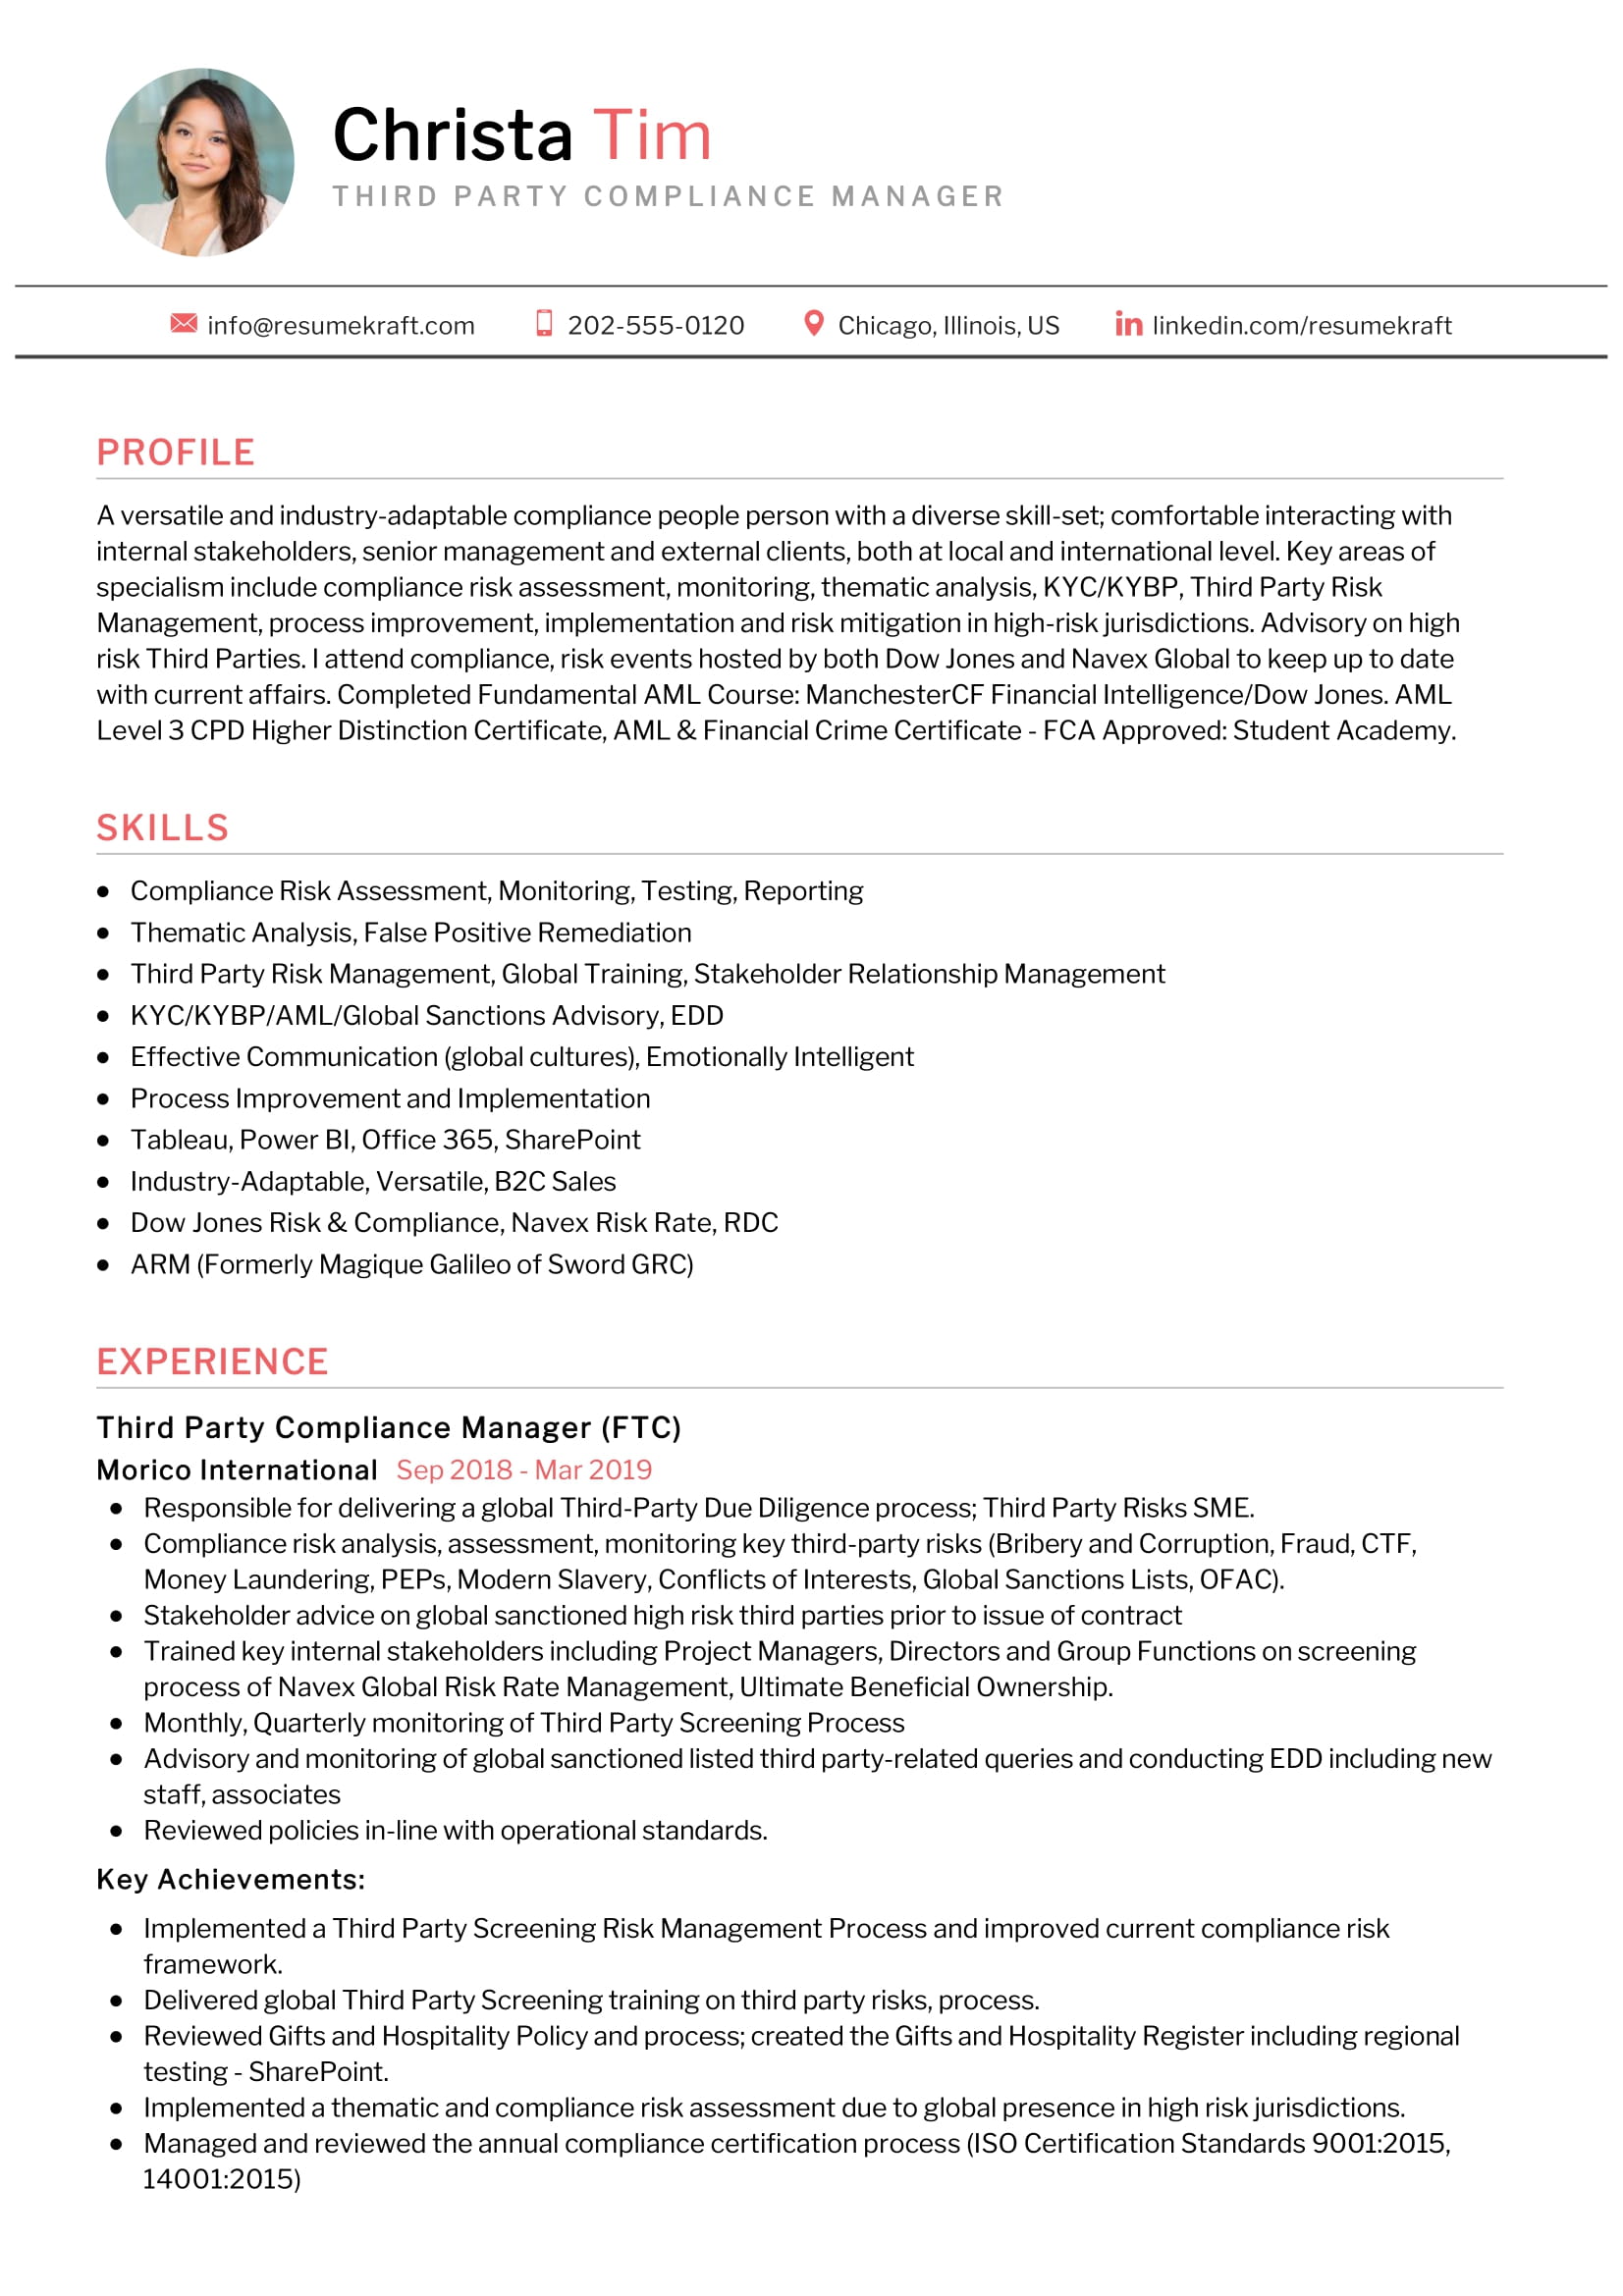 Third Party Compliance Manager Resume